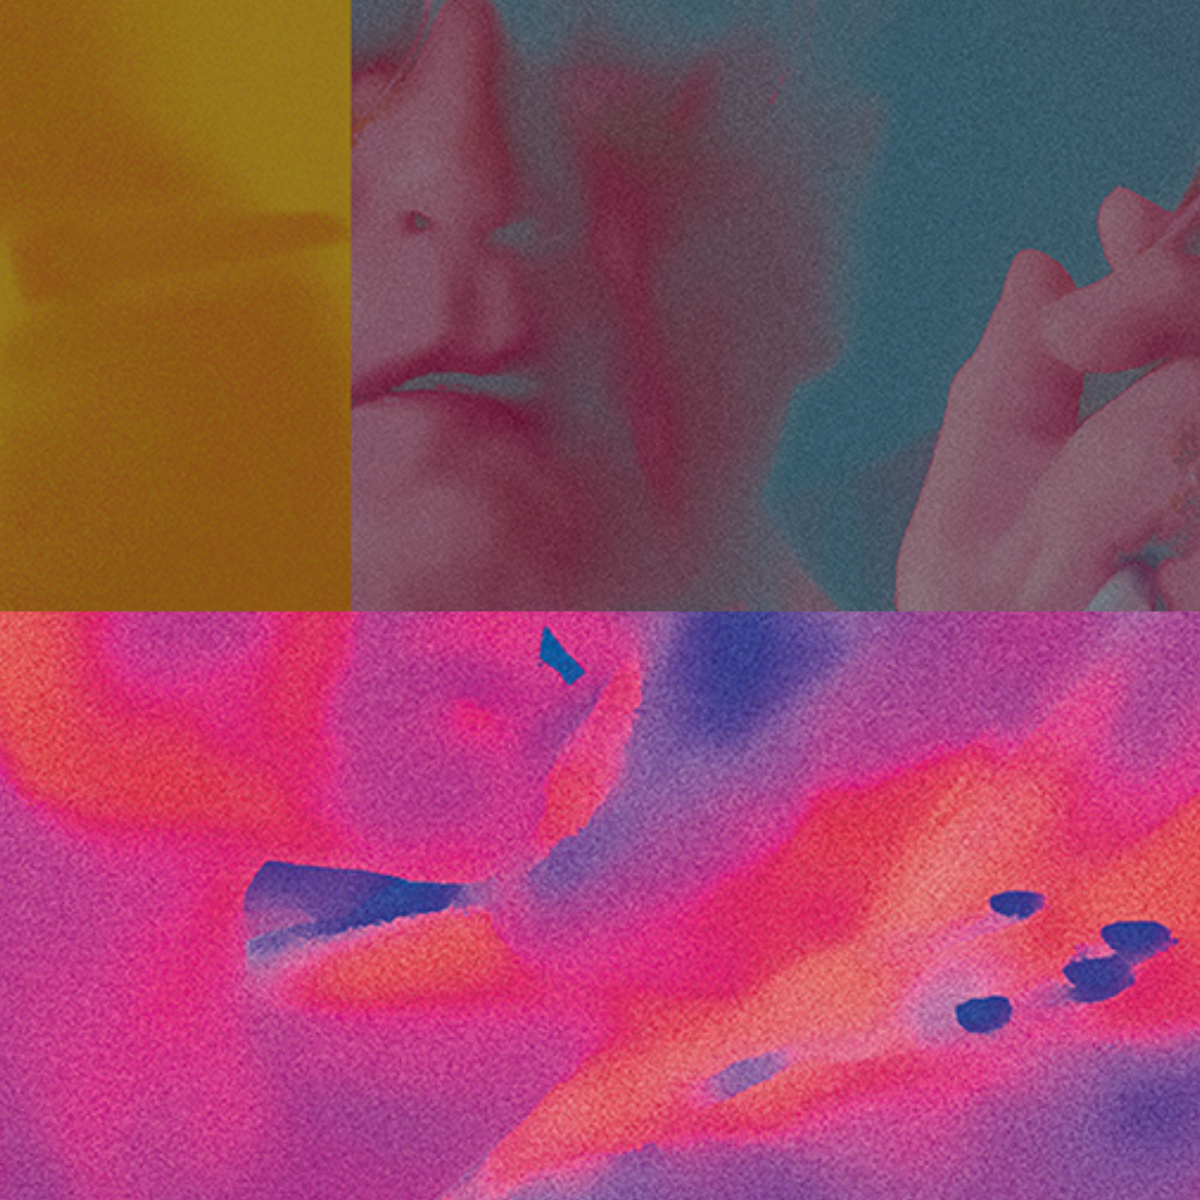 Abstract coloured images with face and hand